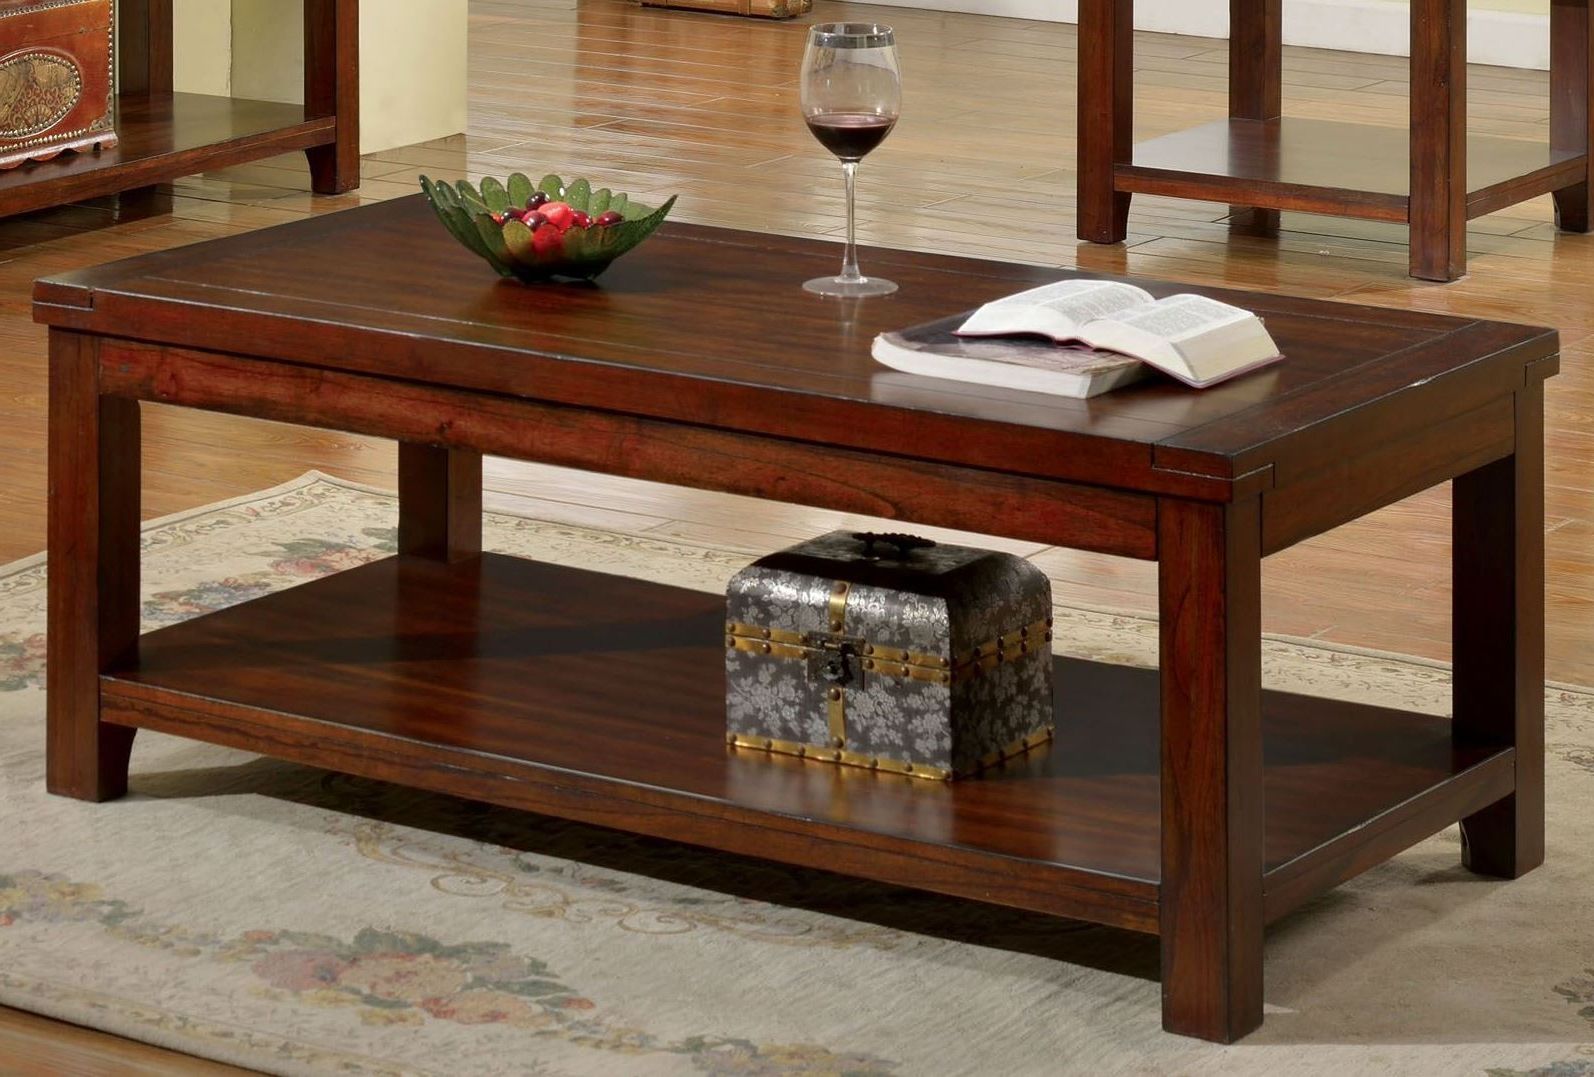 Most Current Heartwood Cherry Wood Coffee Tables Intended For Estell Cherry Coffee Table From Furniture Of America (View 2 of 20)